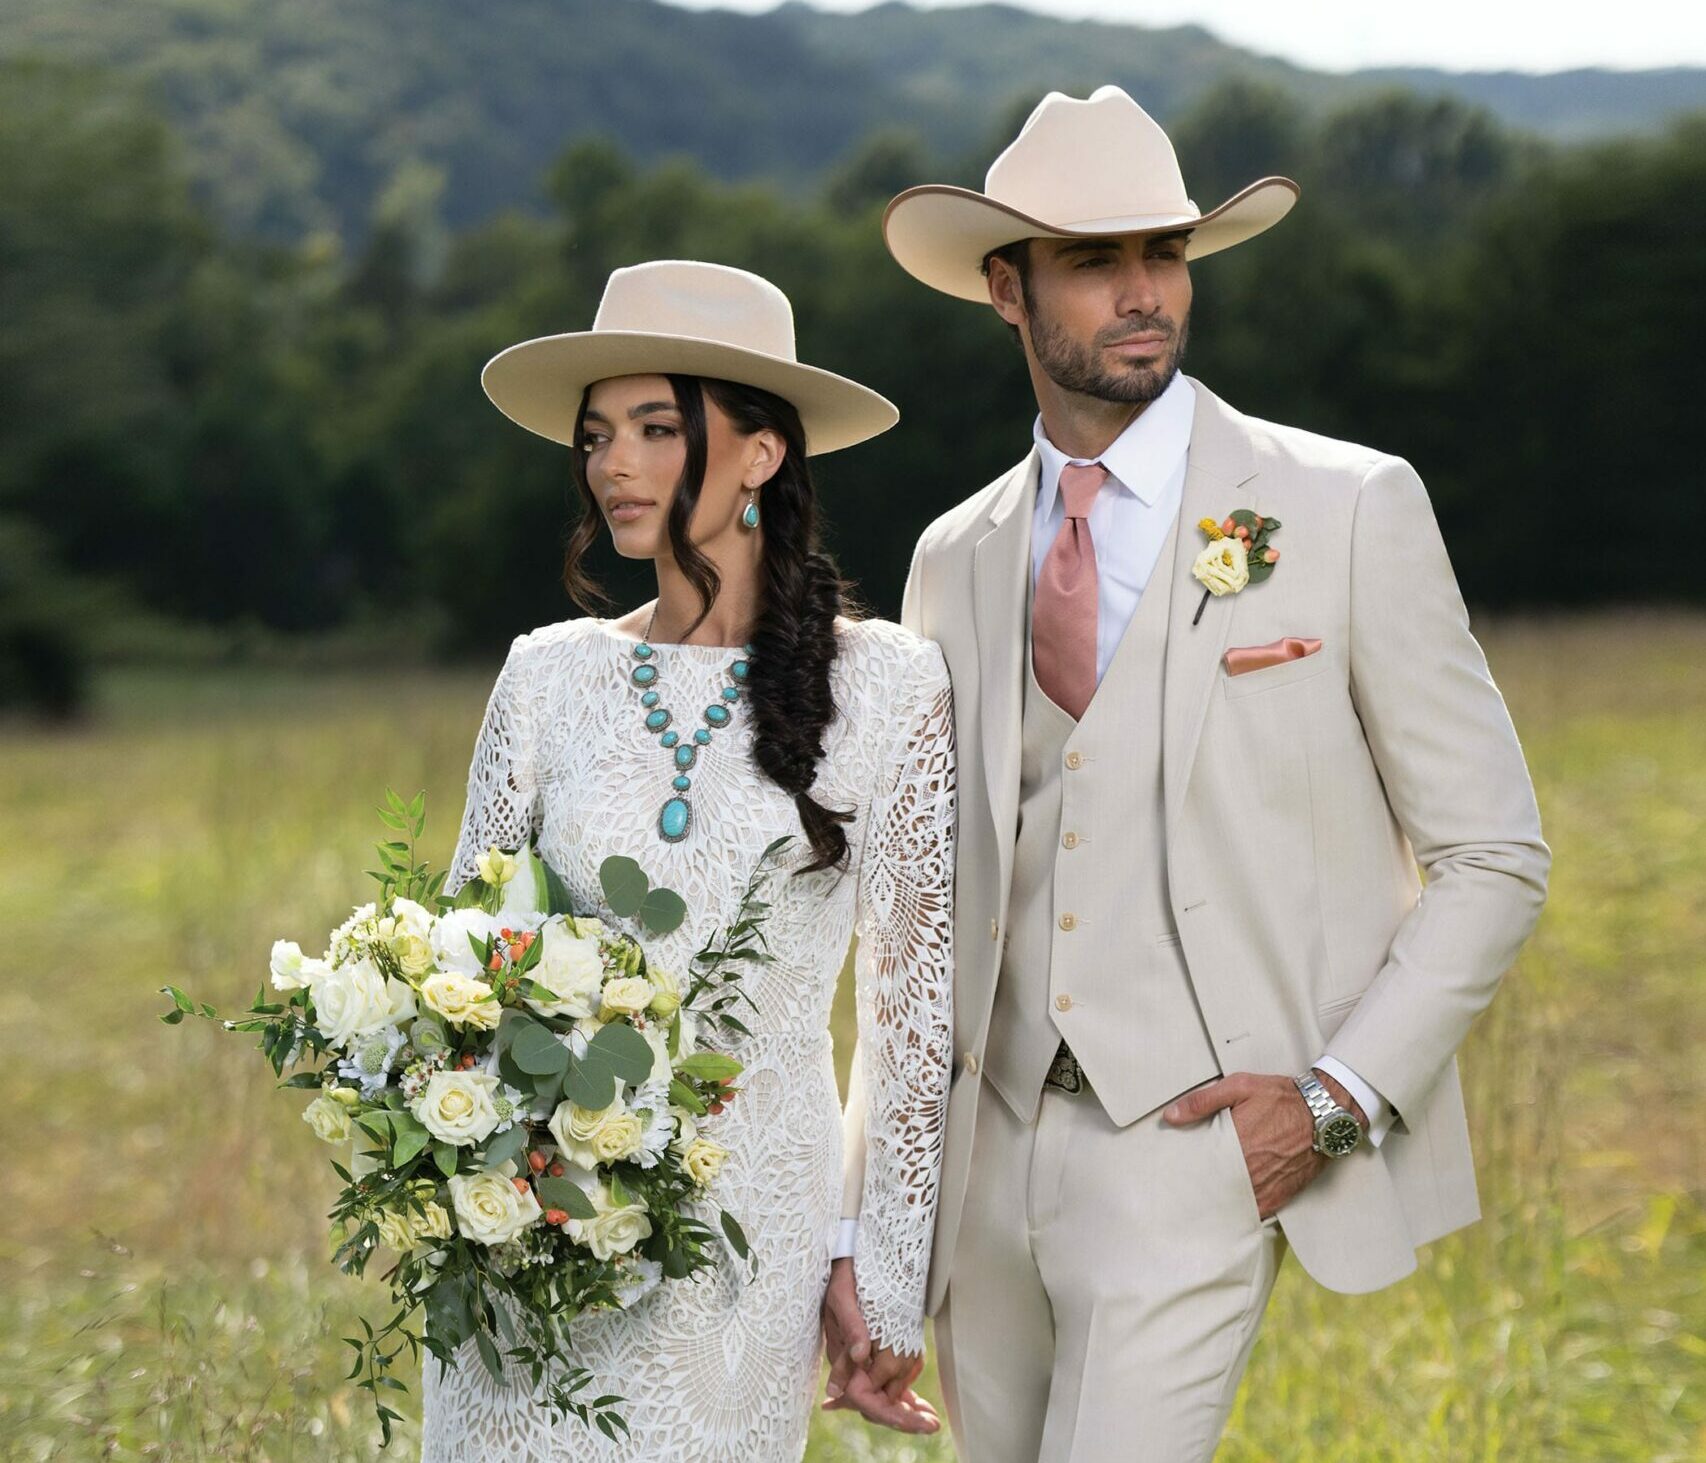 bride in a boho look with white lace dress, turquoise jewelry, and brimmed hat standing with the groom in a Tan Michael Kors Suit and western hat